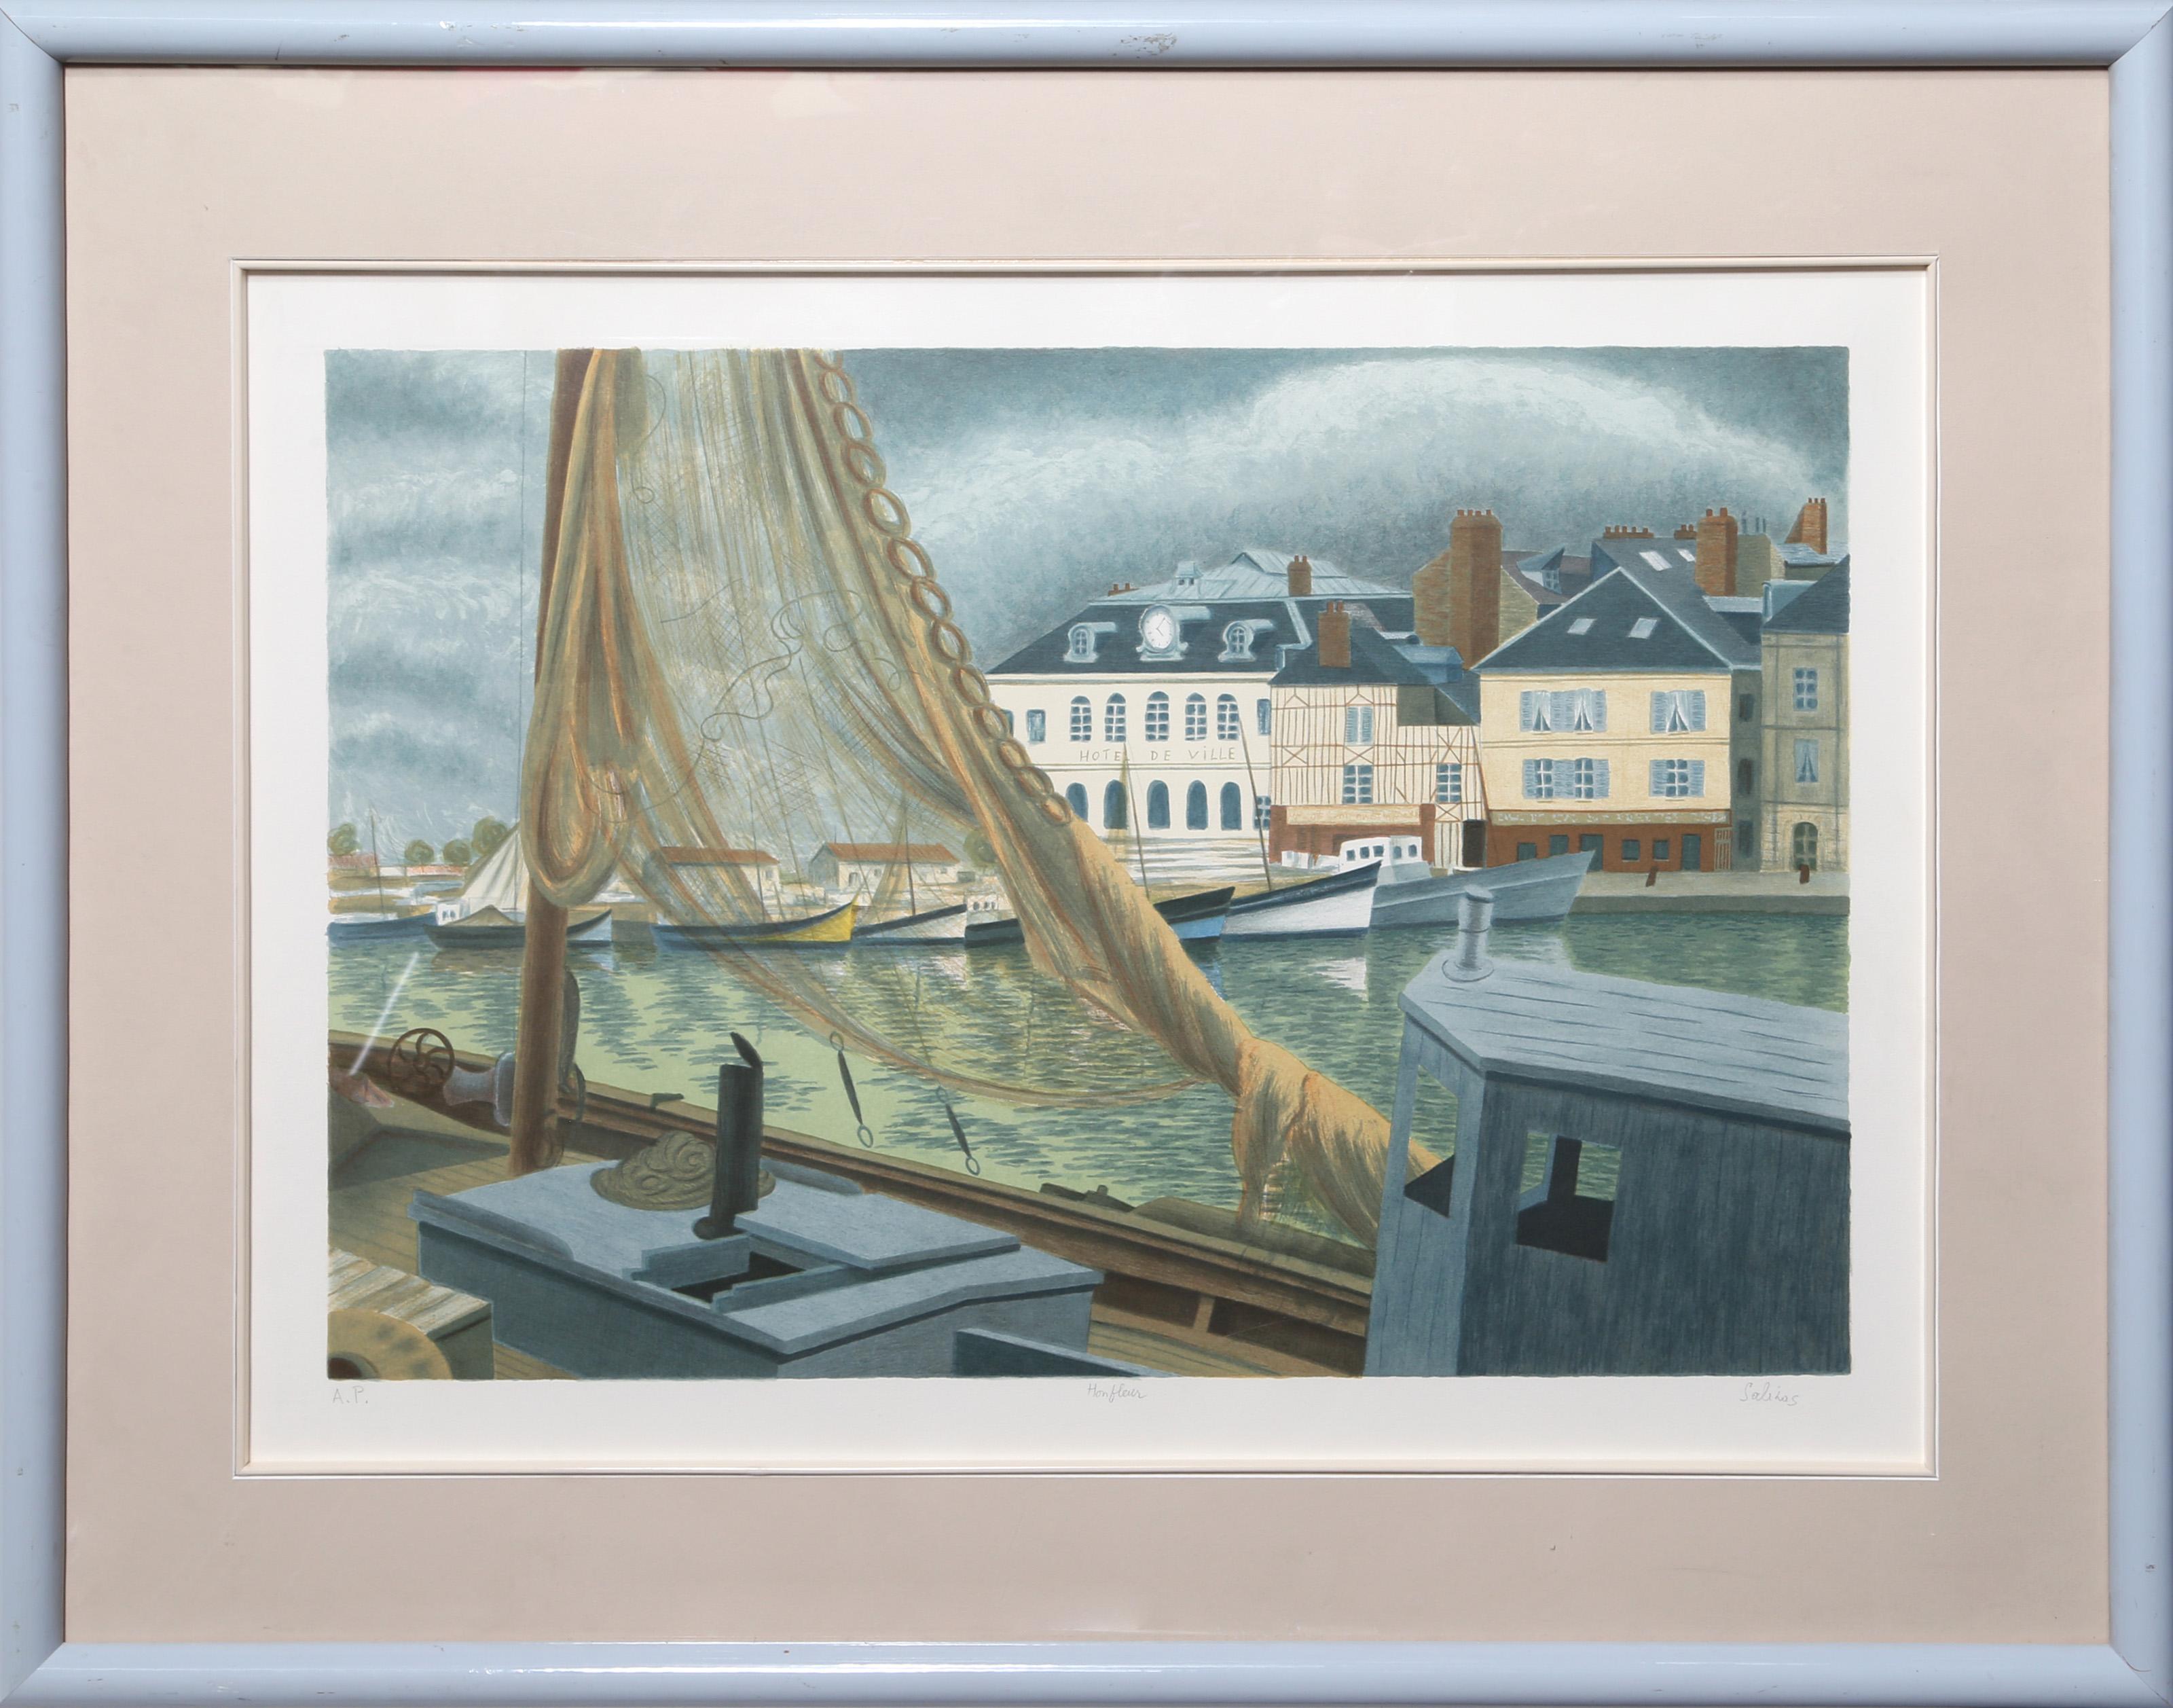 Laurent Marcel Salinas, Egyptian/French (1913 - 2010) -  Morning Light on Honfleur. Year: circa 1980, Medium: Lithograph, signed in pencil, Edition: AP, Image Size: 15.5 x 25 inches, Size: 21 x 29 in. (53.34 x 73.66 cm), Frame Size: 30.5 x 38 inches 